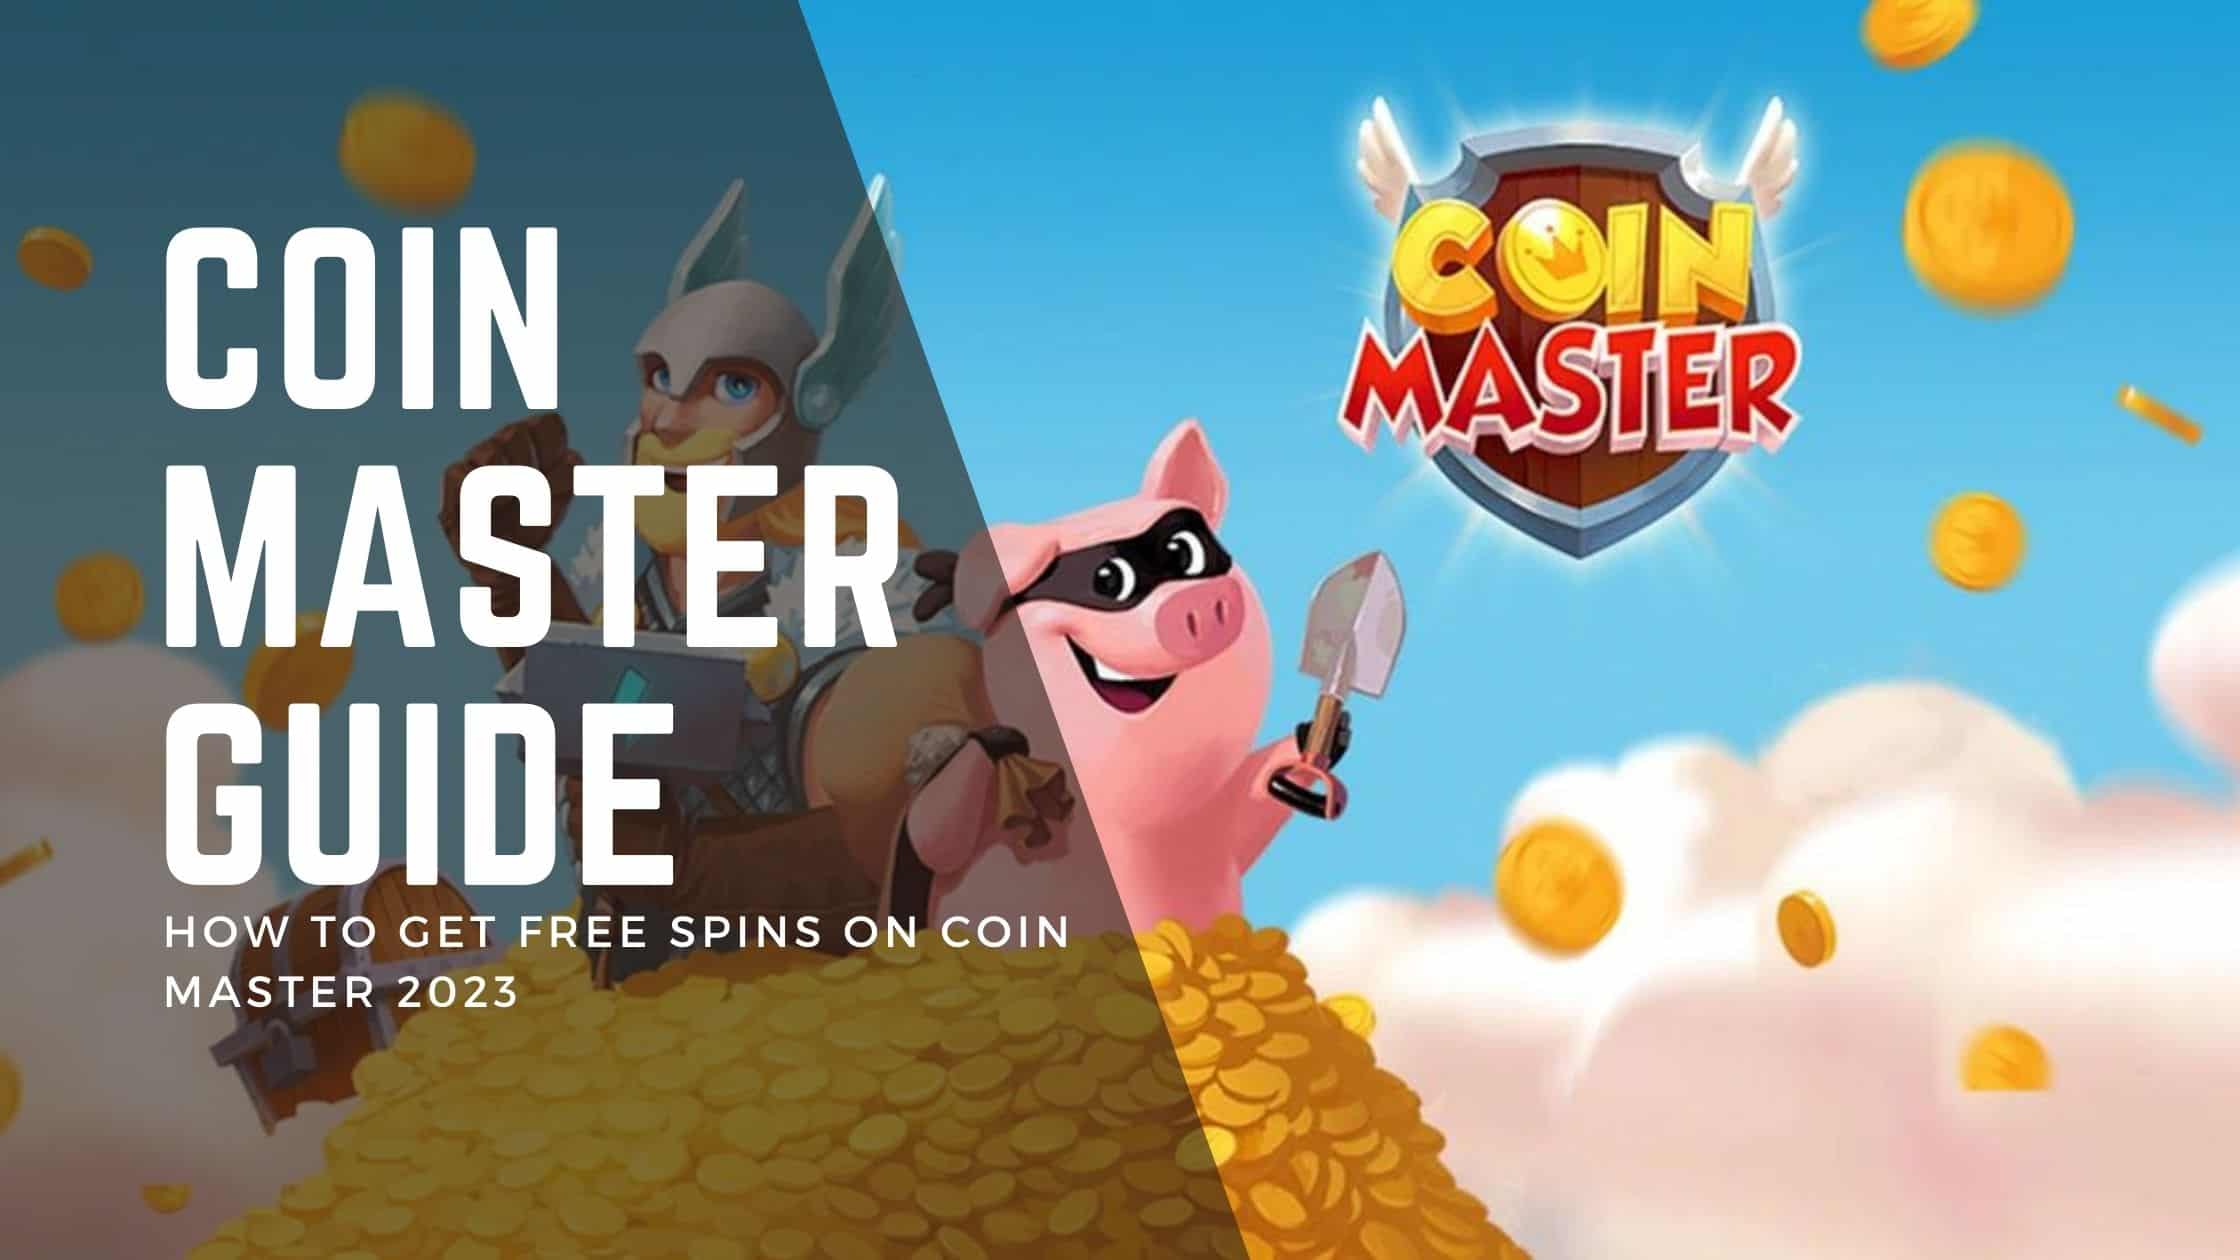 Coin Master Guide: How to get free spins on Coin Master 2023